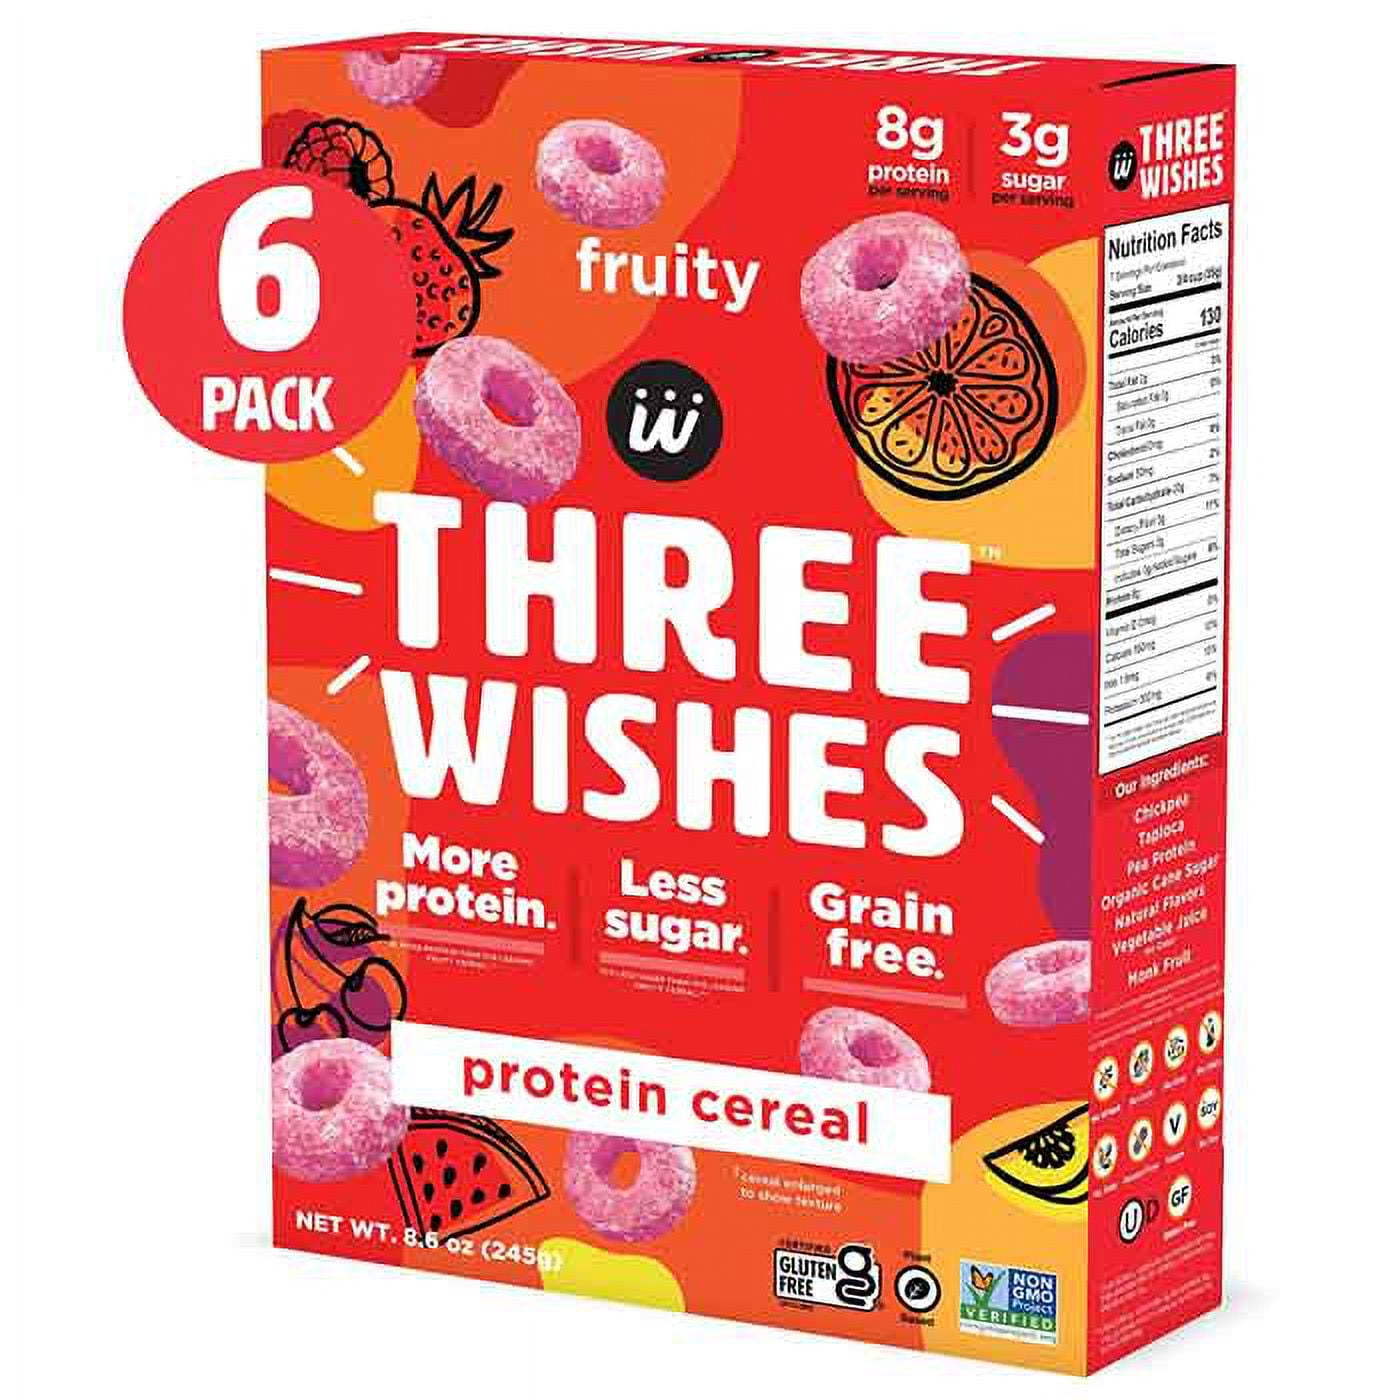 Three Wishes Cereal (@threewishes) • Instagram photos and videos